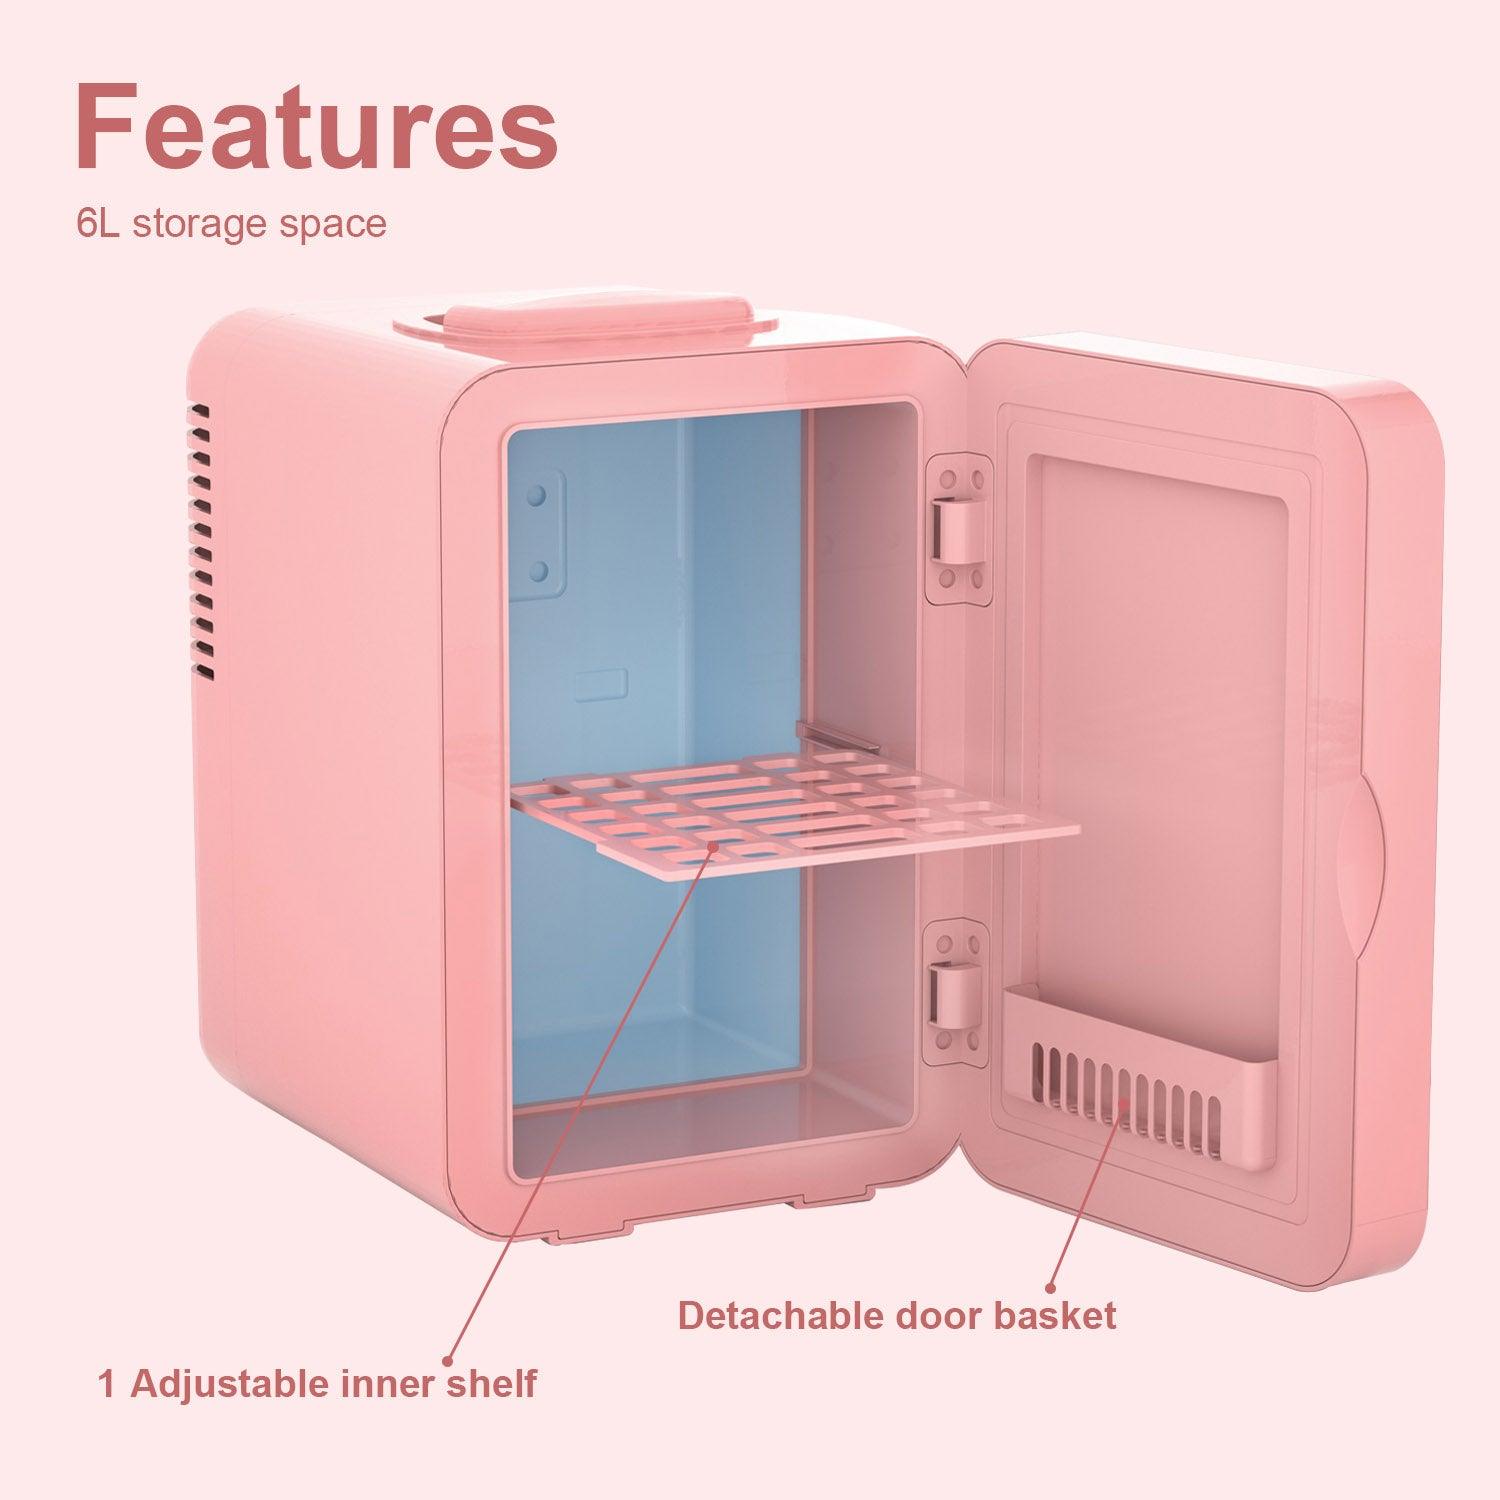 Mini Fridge - Hot or Cold - LED Lighted with Mirror Door - Pink